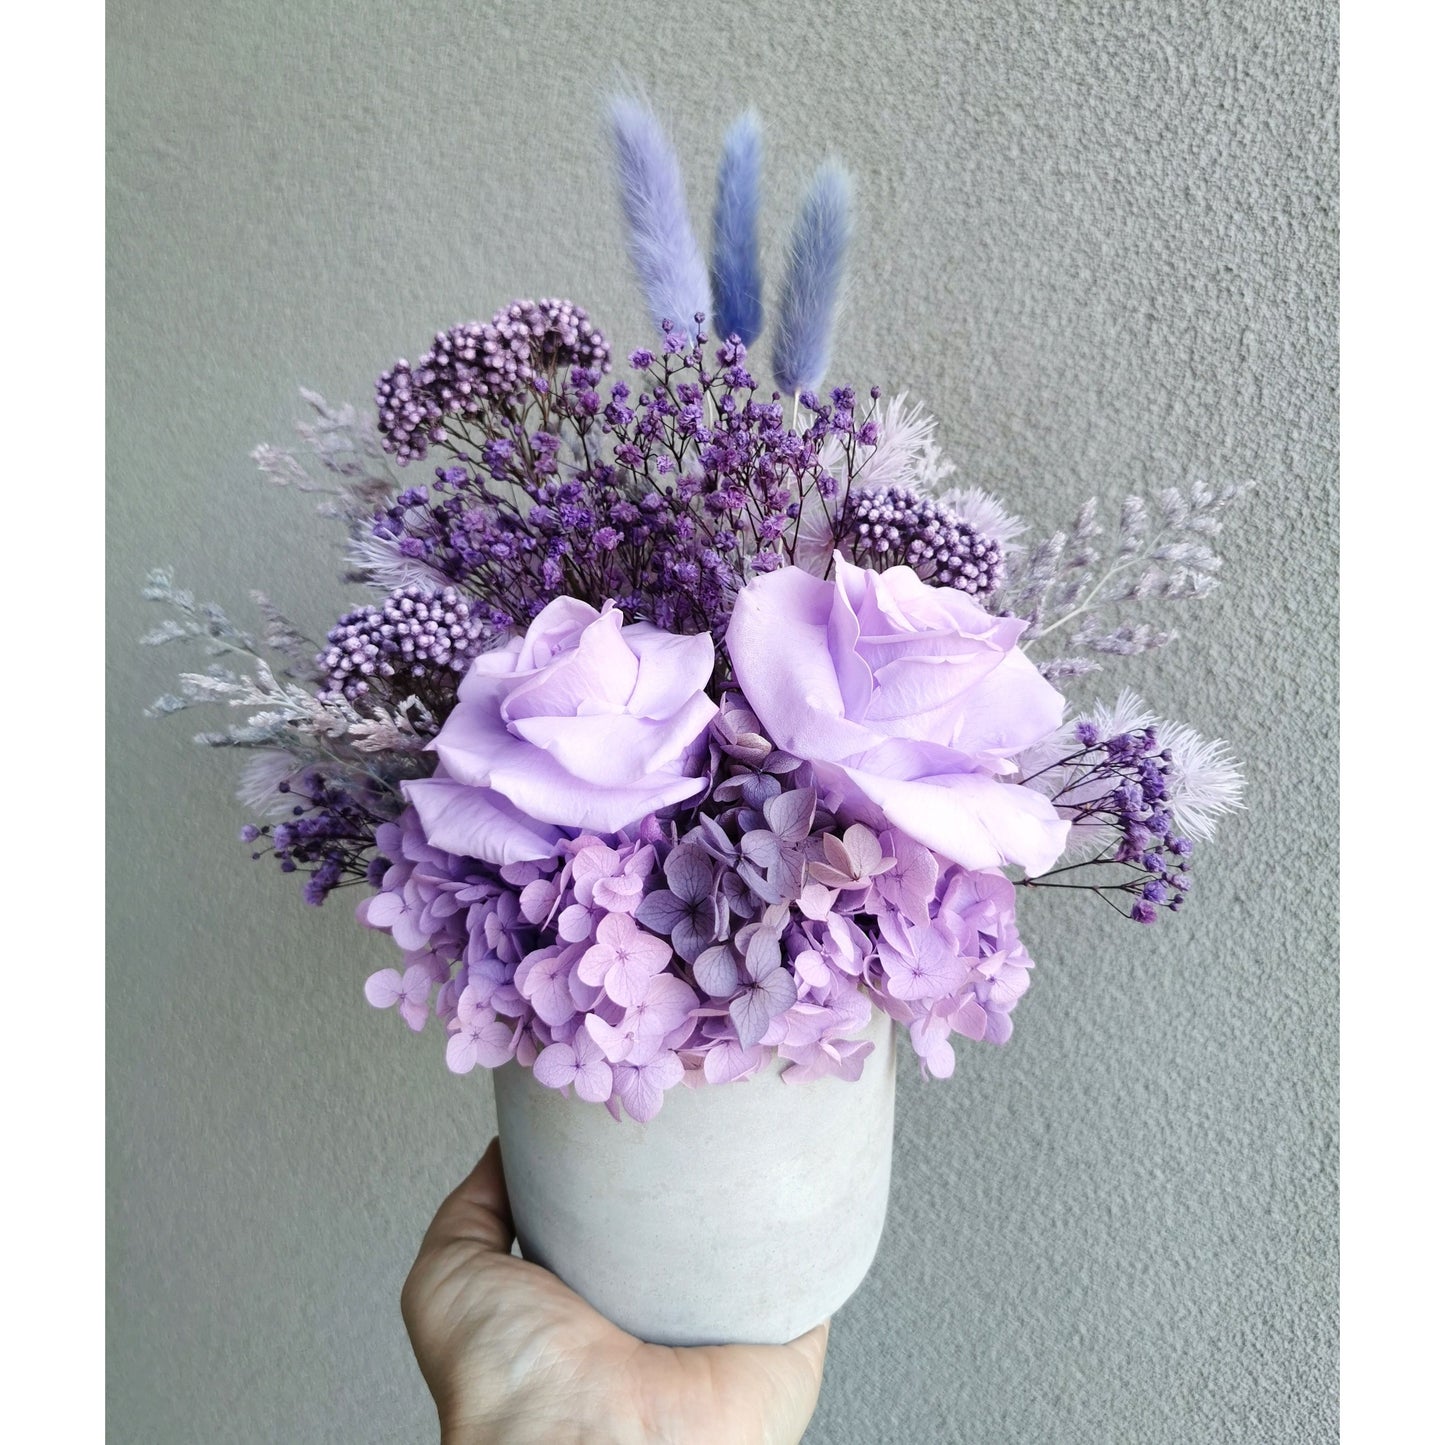 Purple shades of dried & preserved flowers in grey cement pot. Photo shows arrangement being held by hand against a blank wall